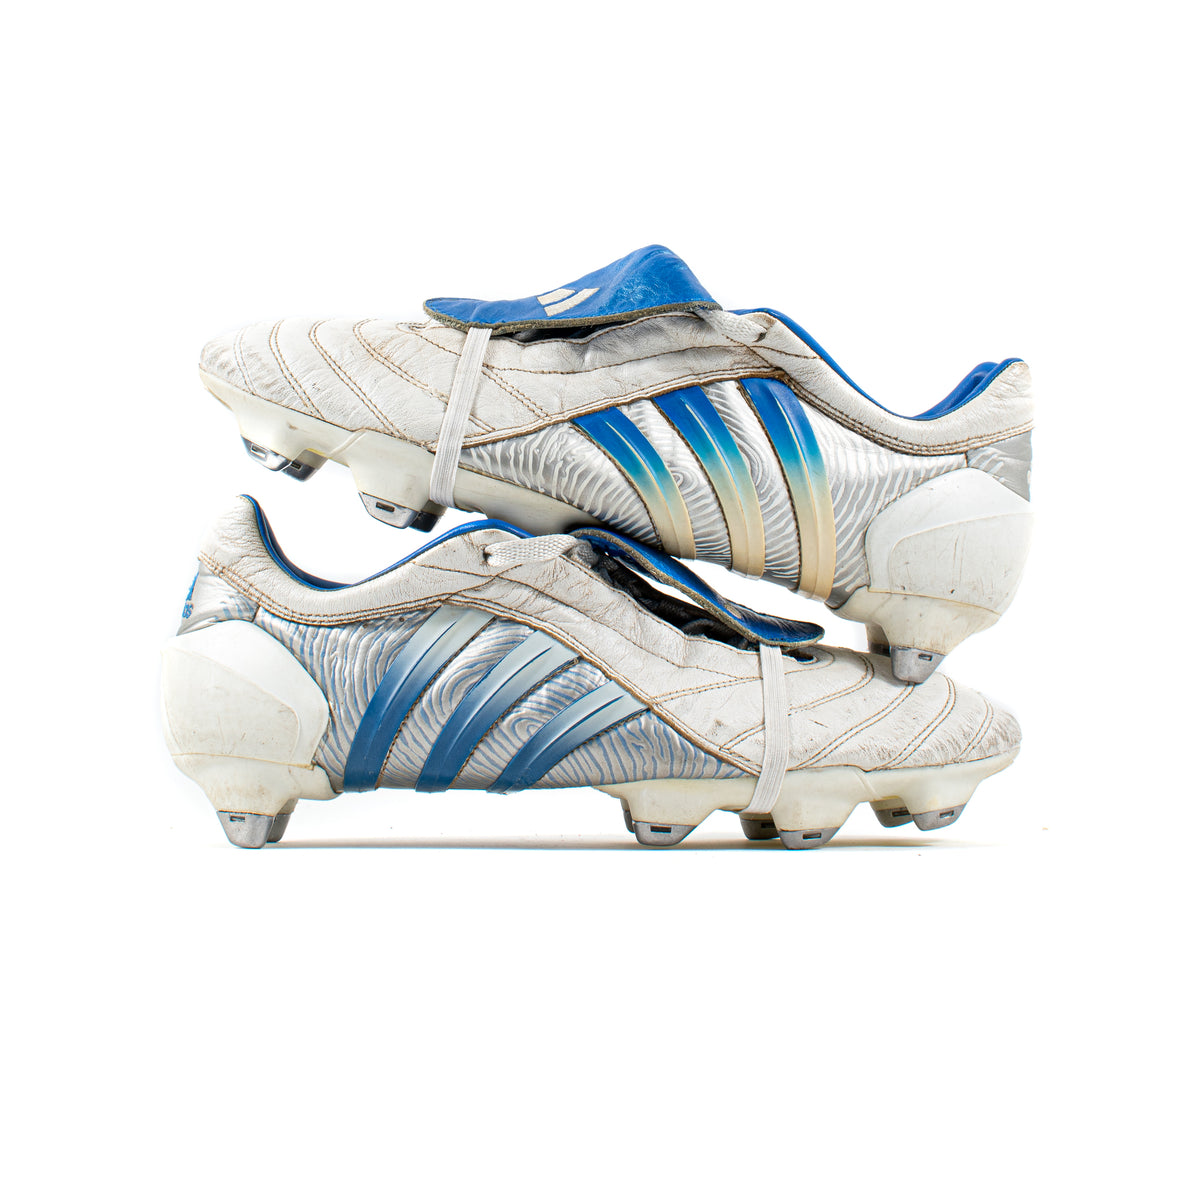 Blue, Gold & White FG Soccer Cleats: The Ultimate Adidas Predator Pulse